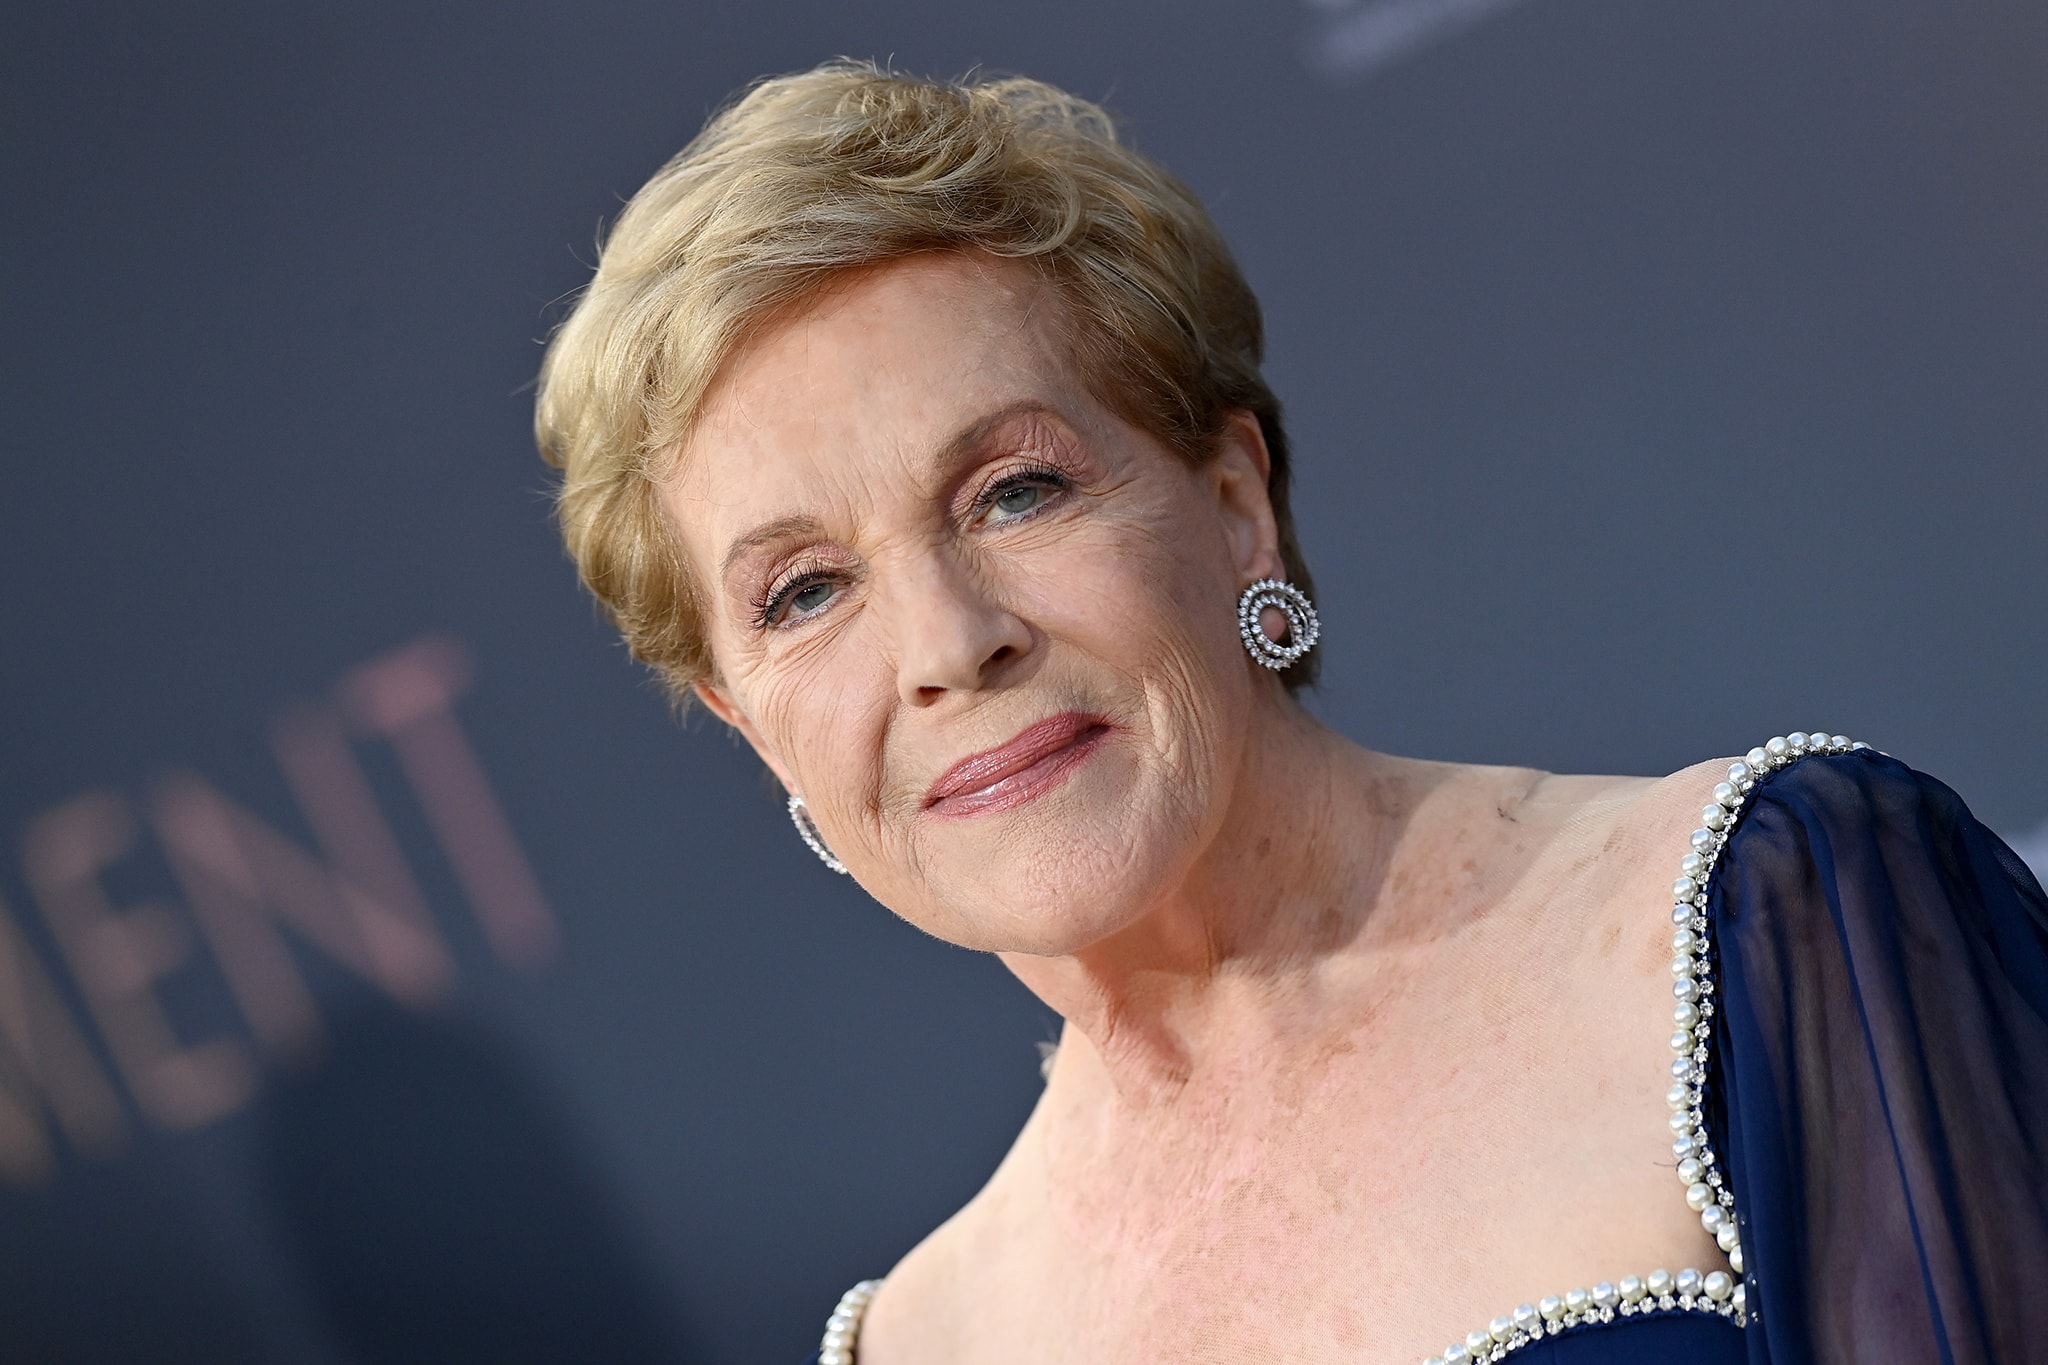 Julie Andrews acknowledged the people who work behind the scenes to bring film to the screen